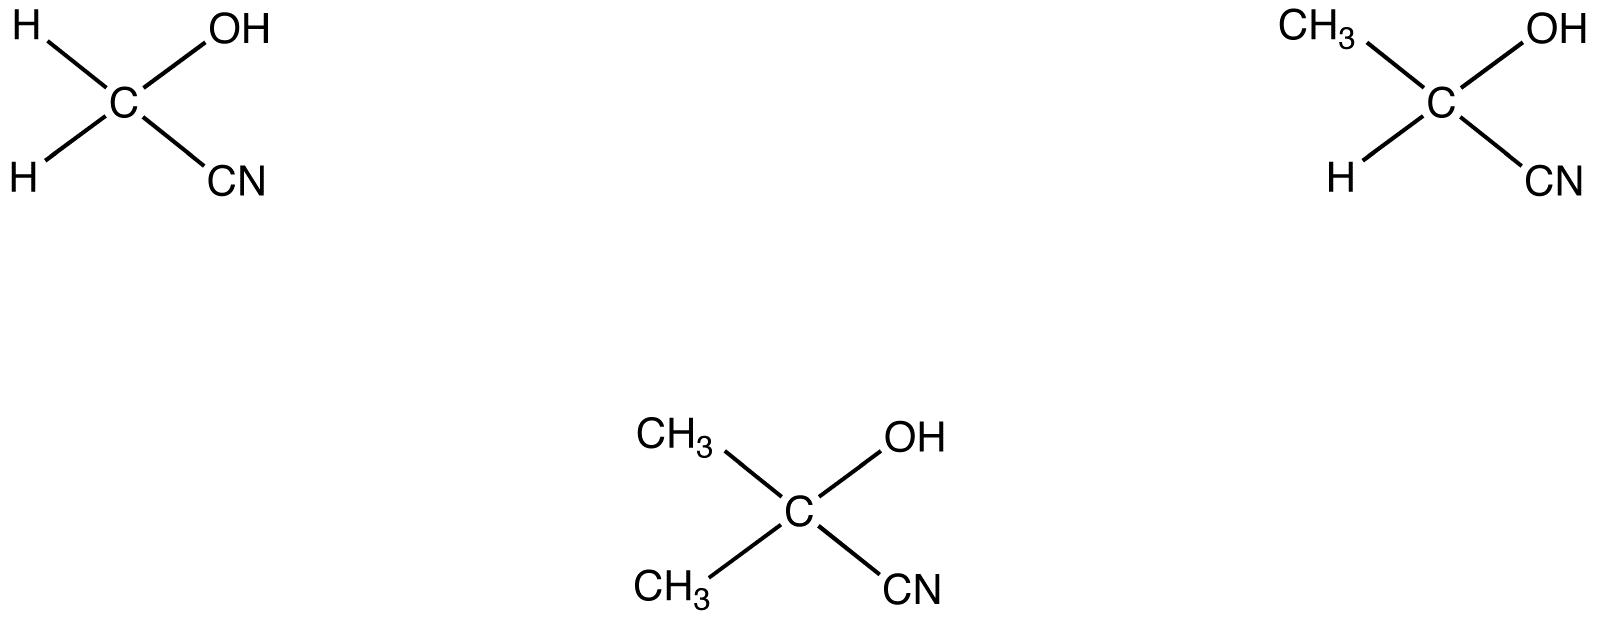 cyanohydrin2.png